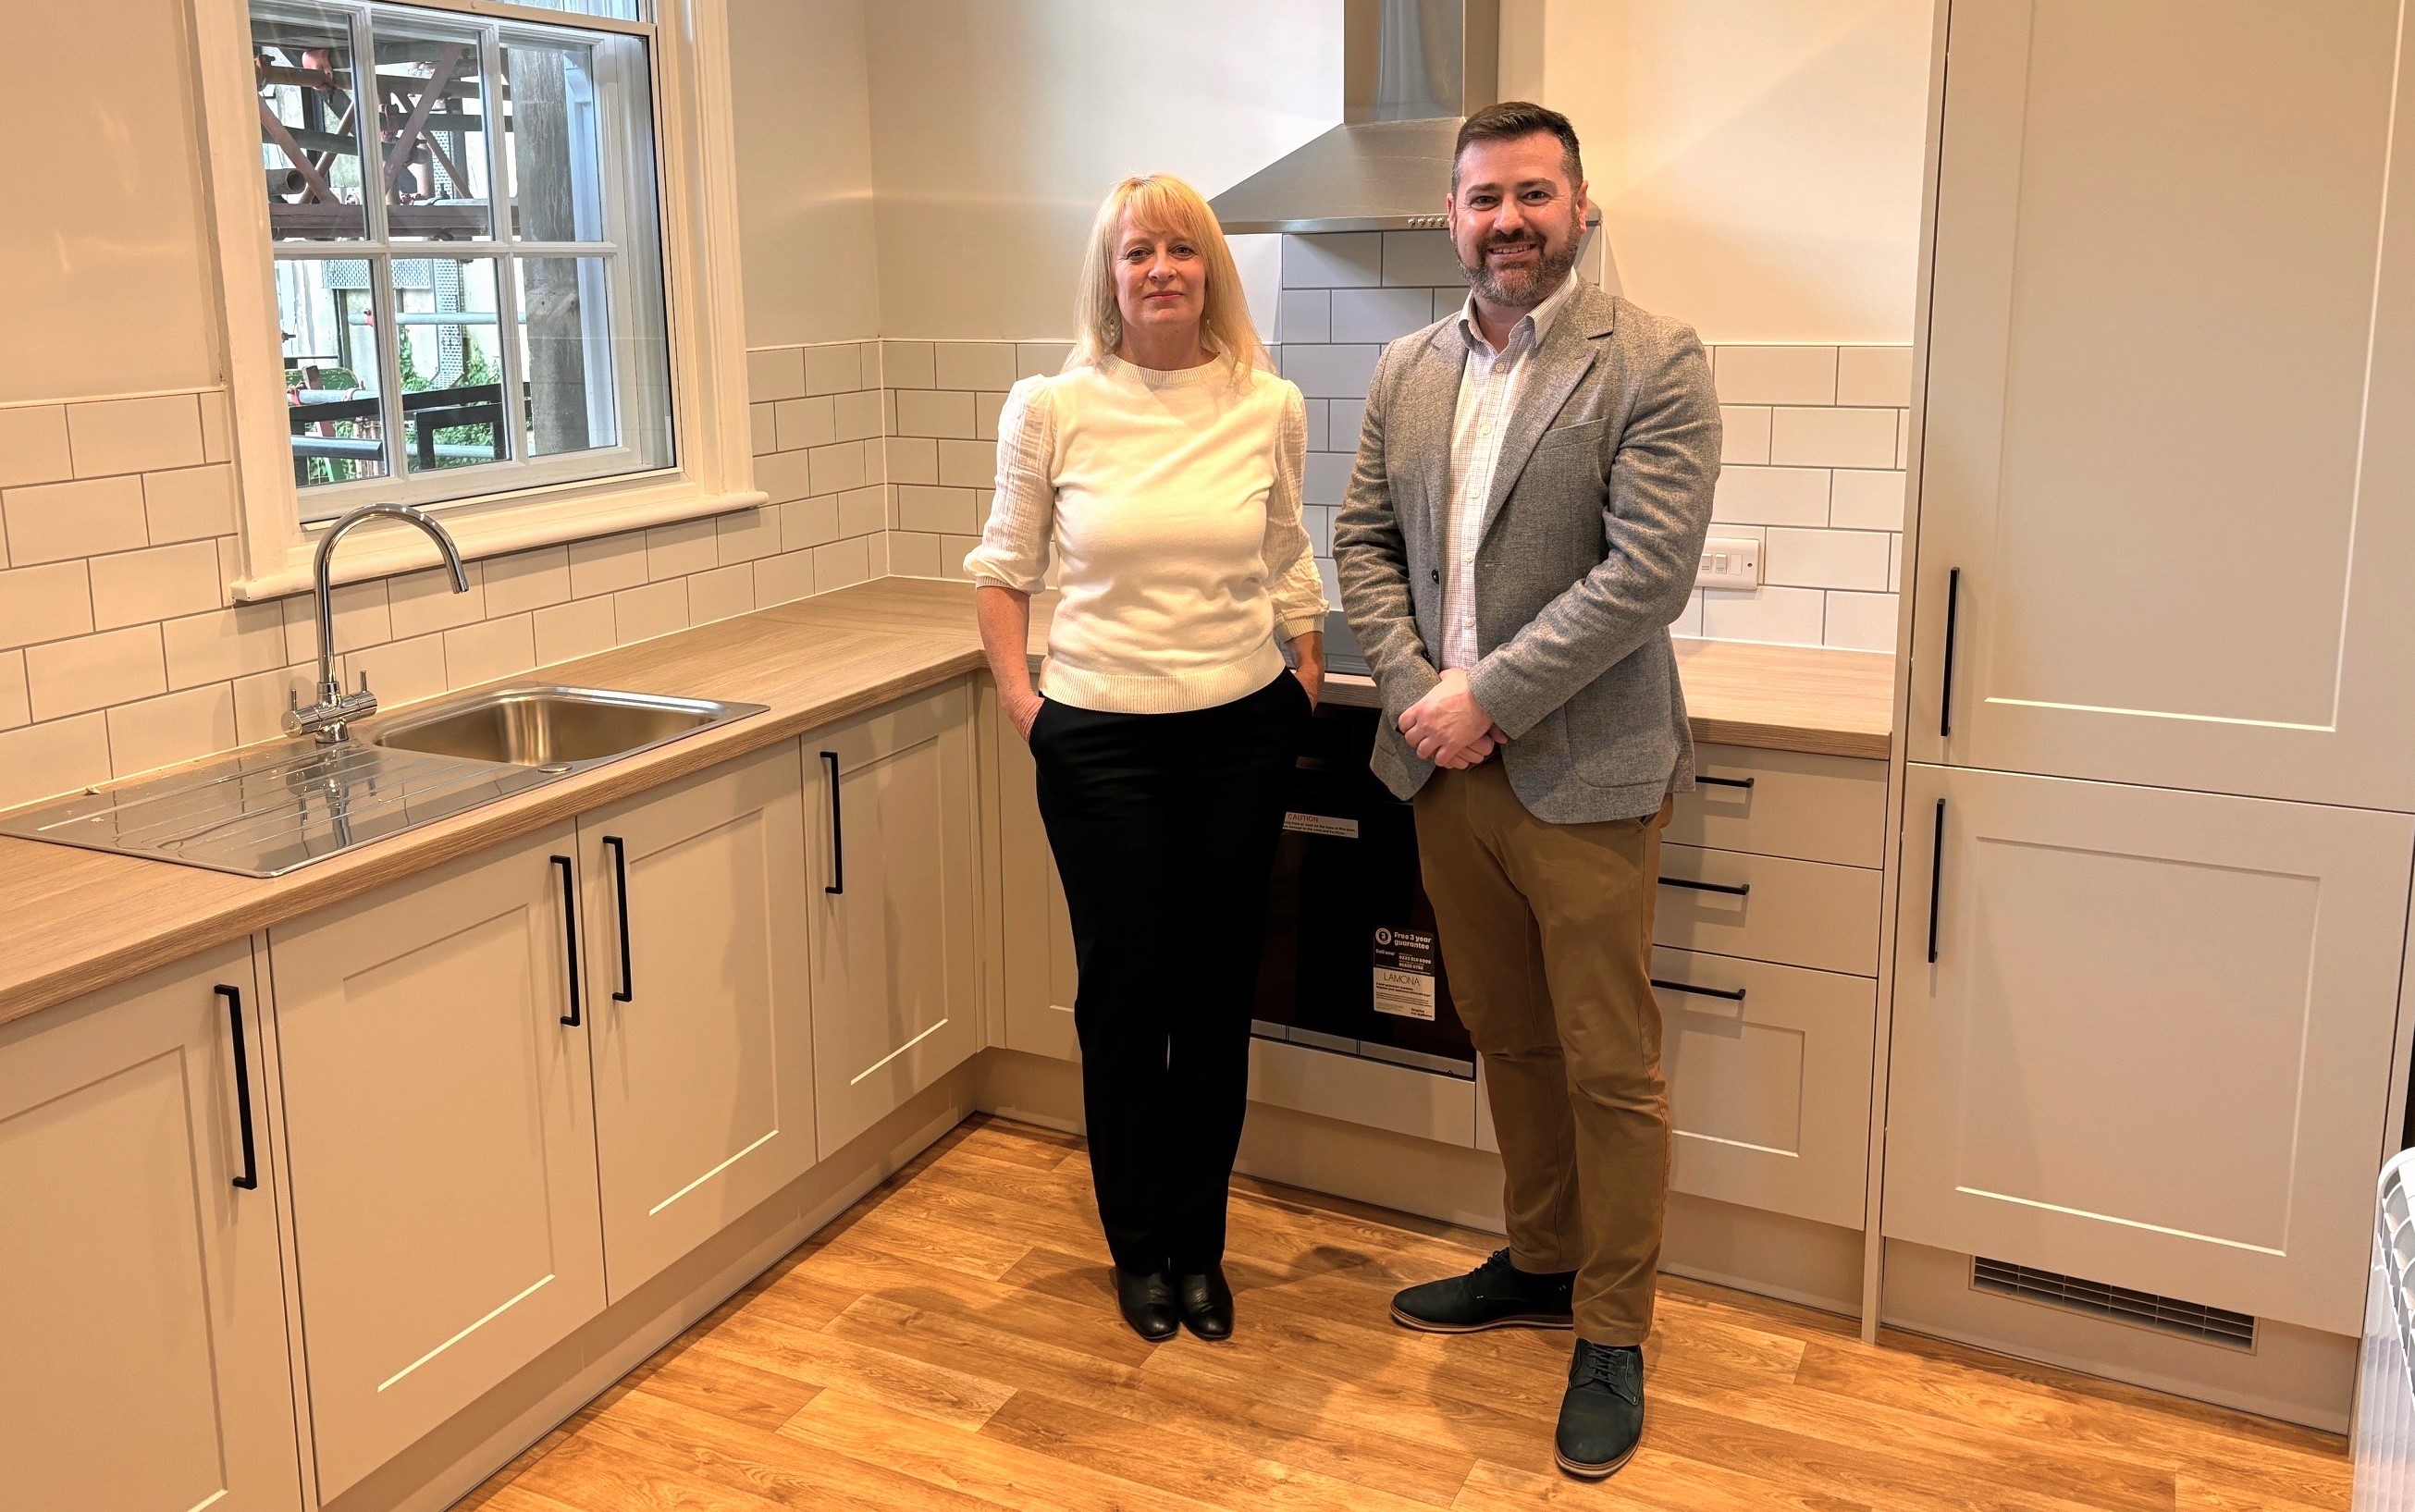 Pictured left to right are Sally Higham and Councillor Kevin Guy in a newly fitted kitchen at a social housing flat in Bath